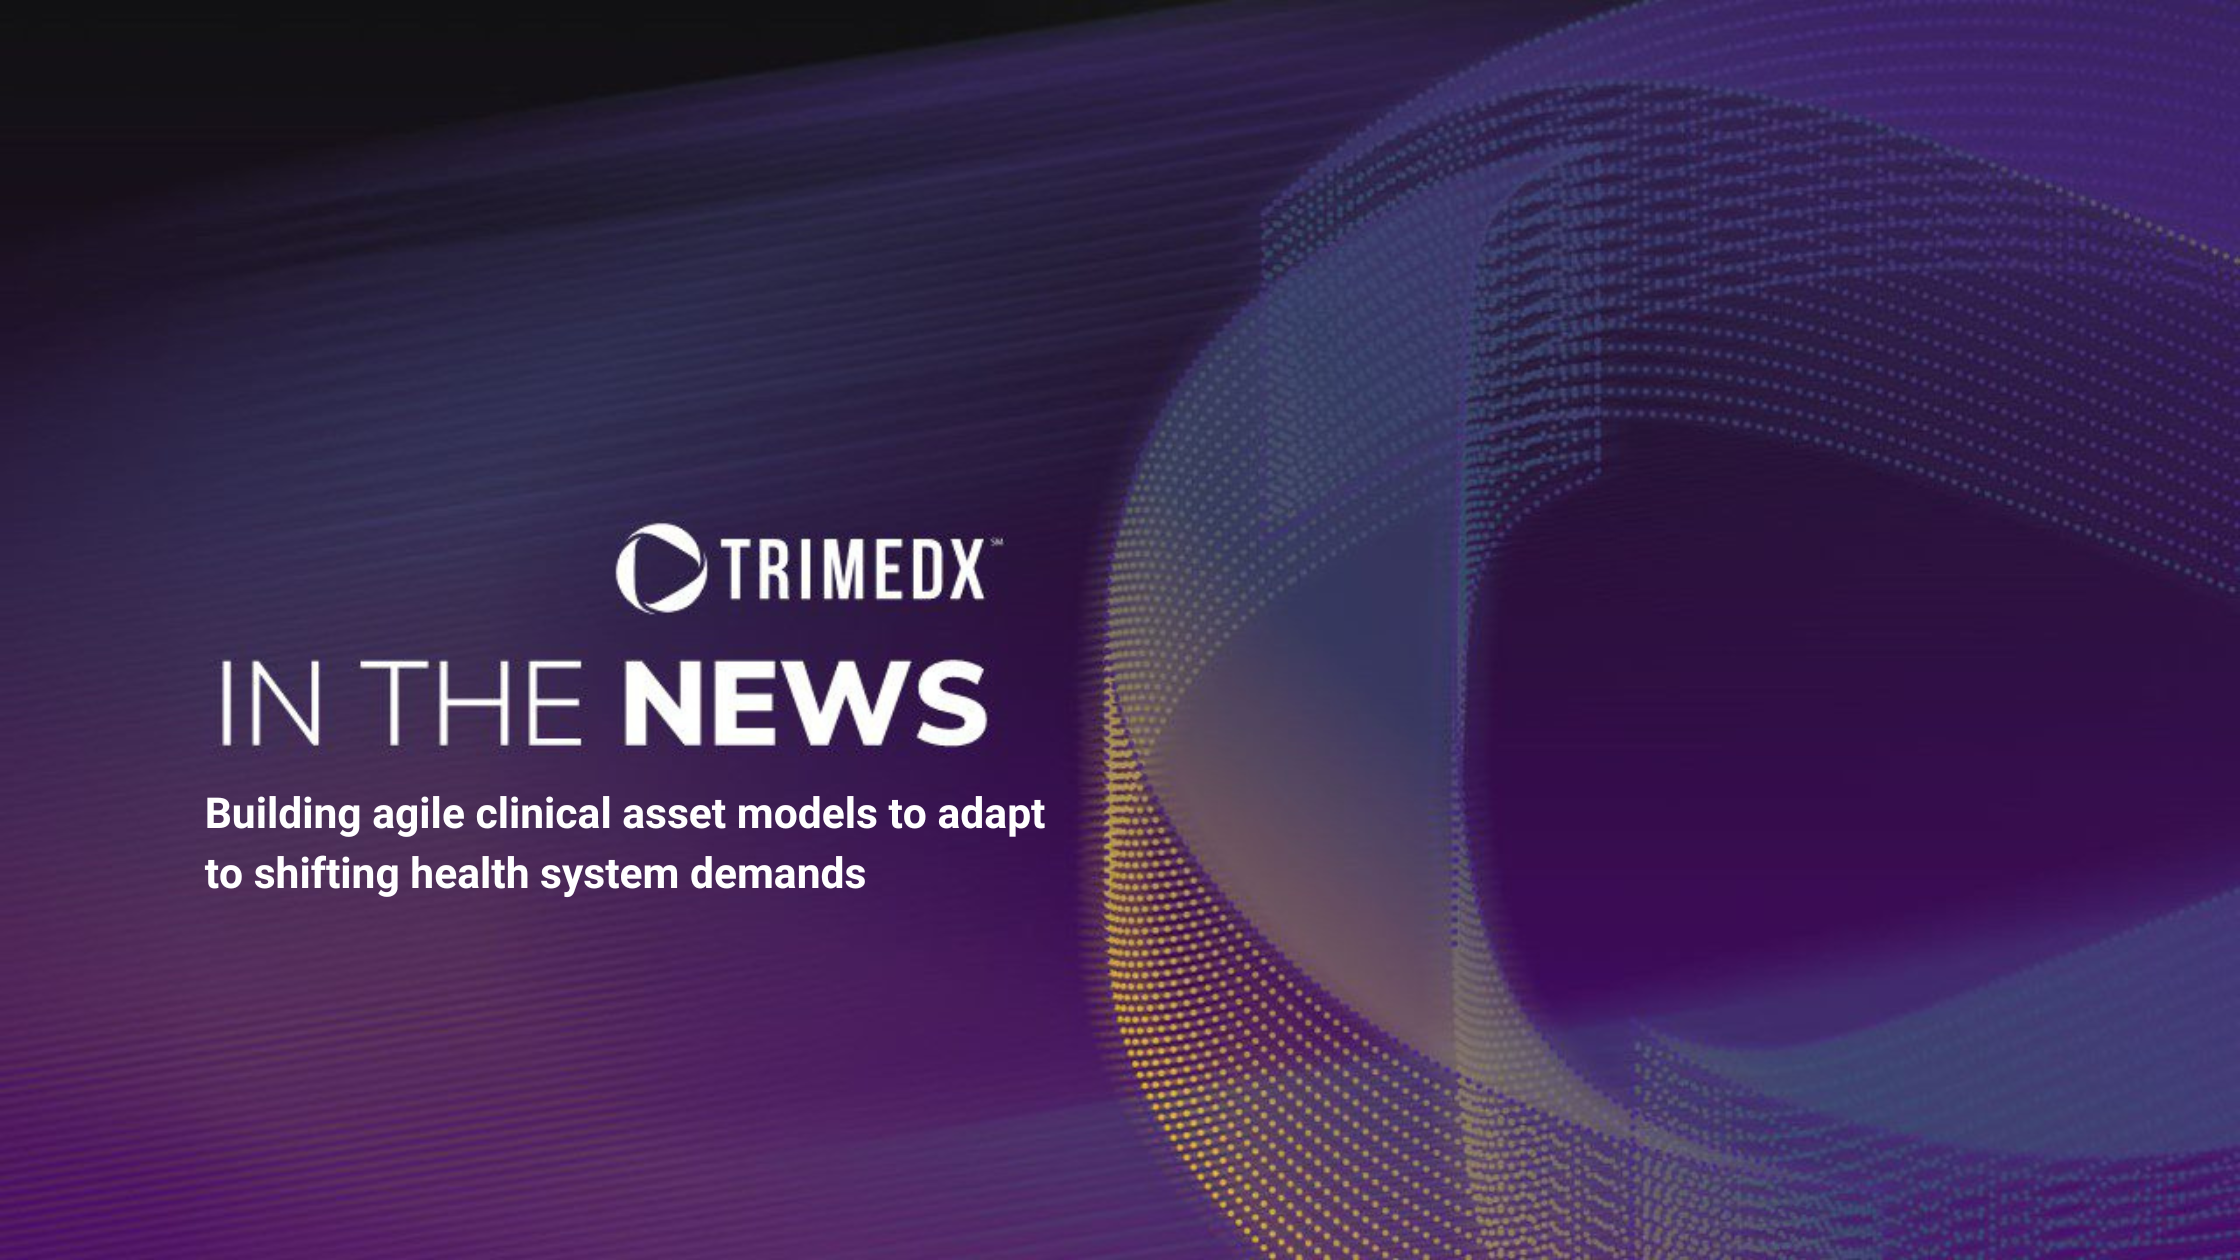 TRIMEDX was featured in a Becker's Hospital Review article on data-driven asset management in healthcare.